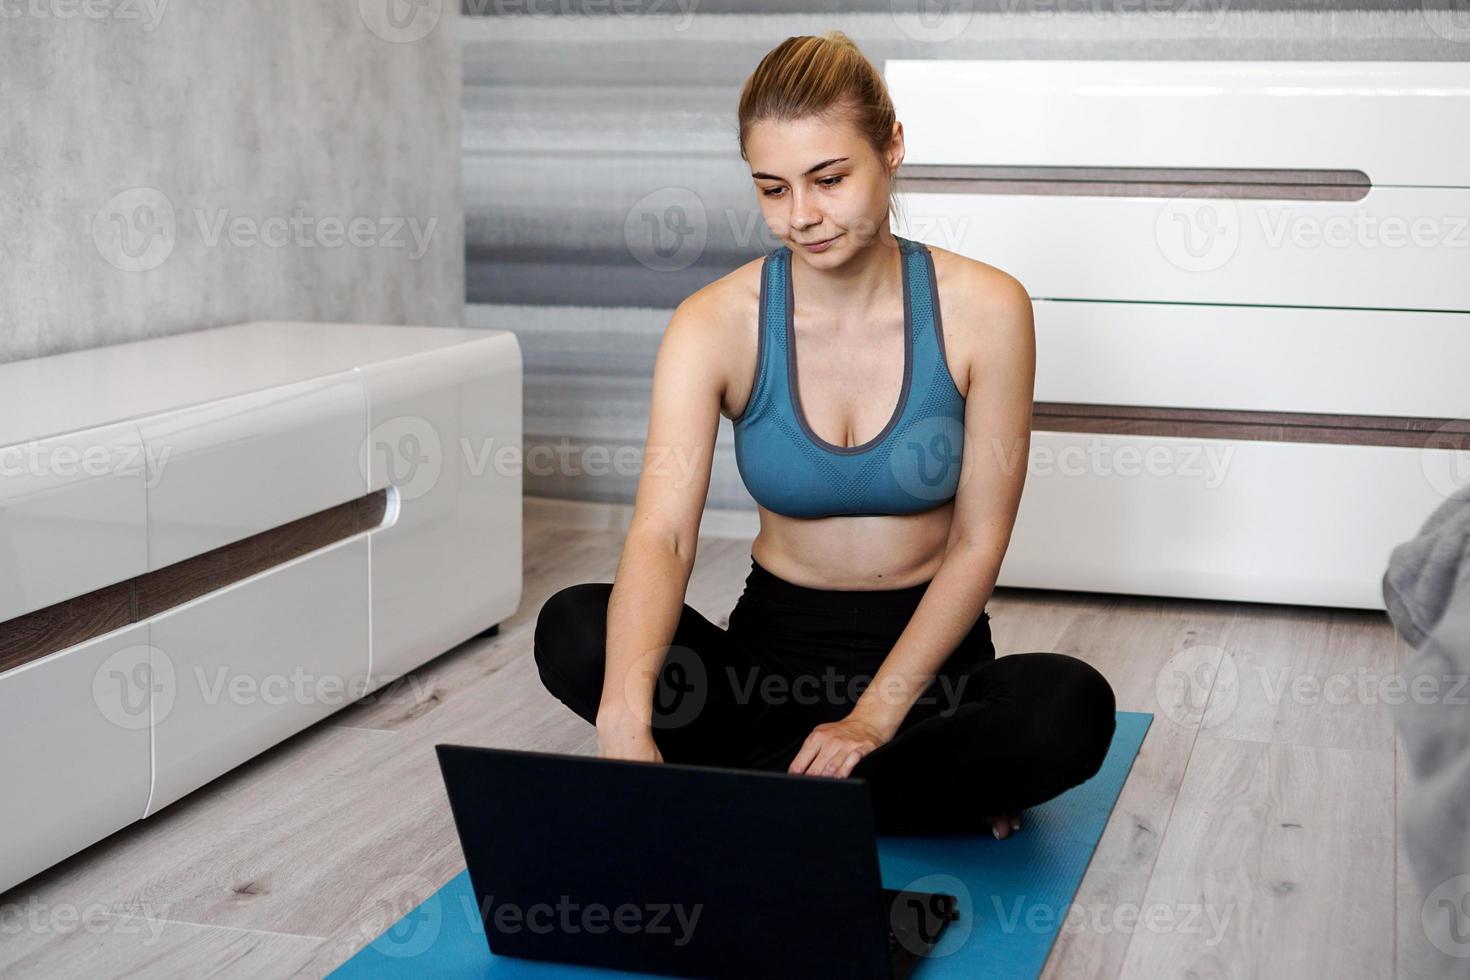 Girl training at home and watching videos on laptop, training photo